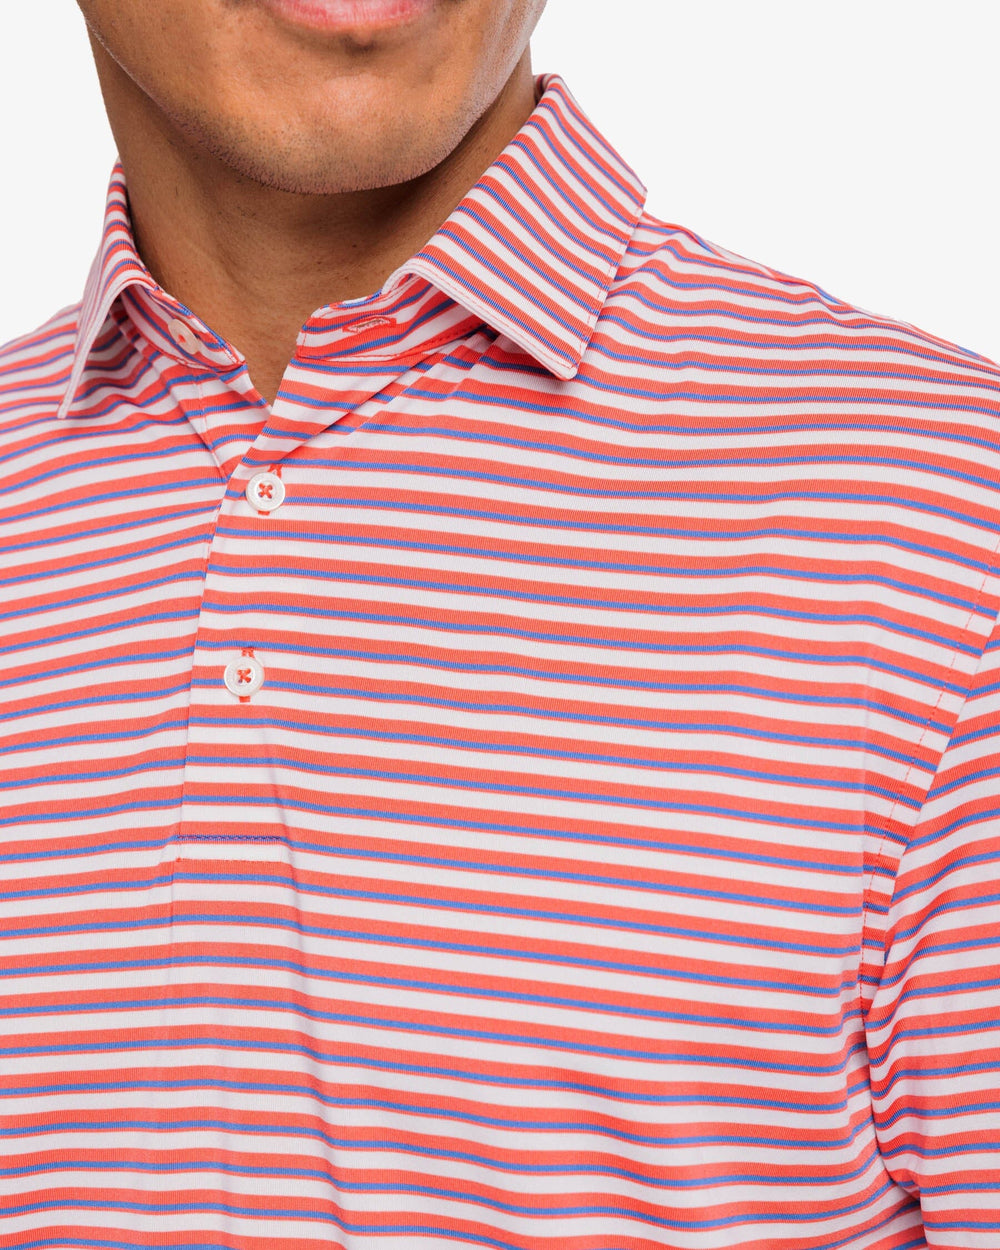 The detail view of the Southern Tide Driver Gulf Stripe Polo Shirt by Southern Tide - Rosewood Red